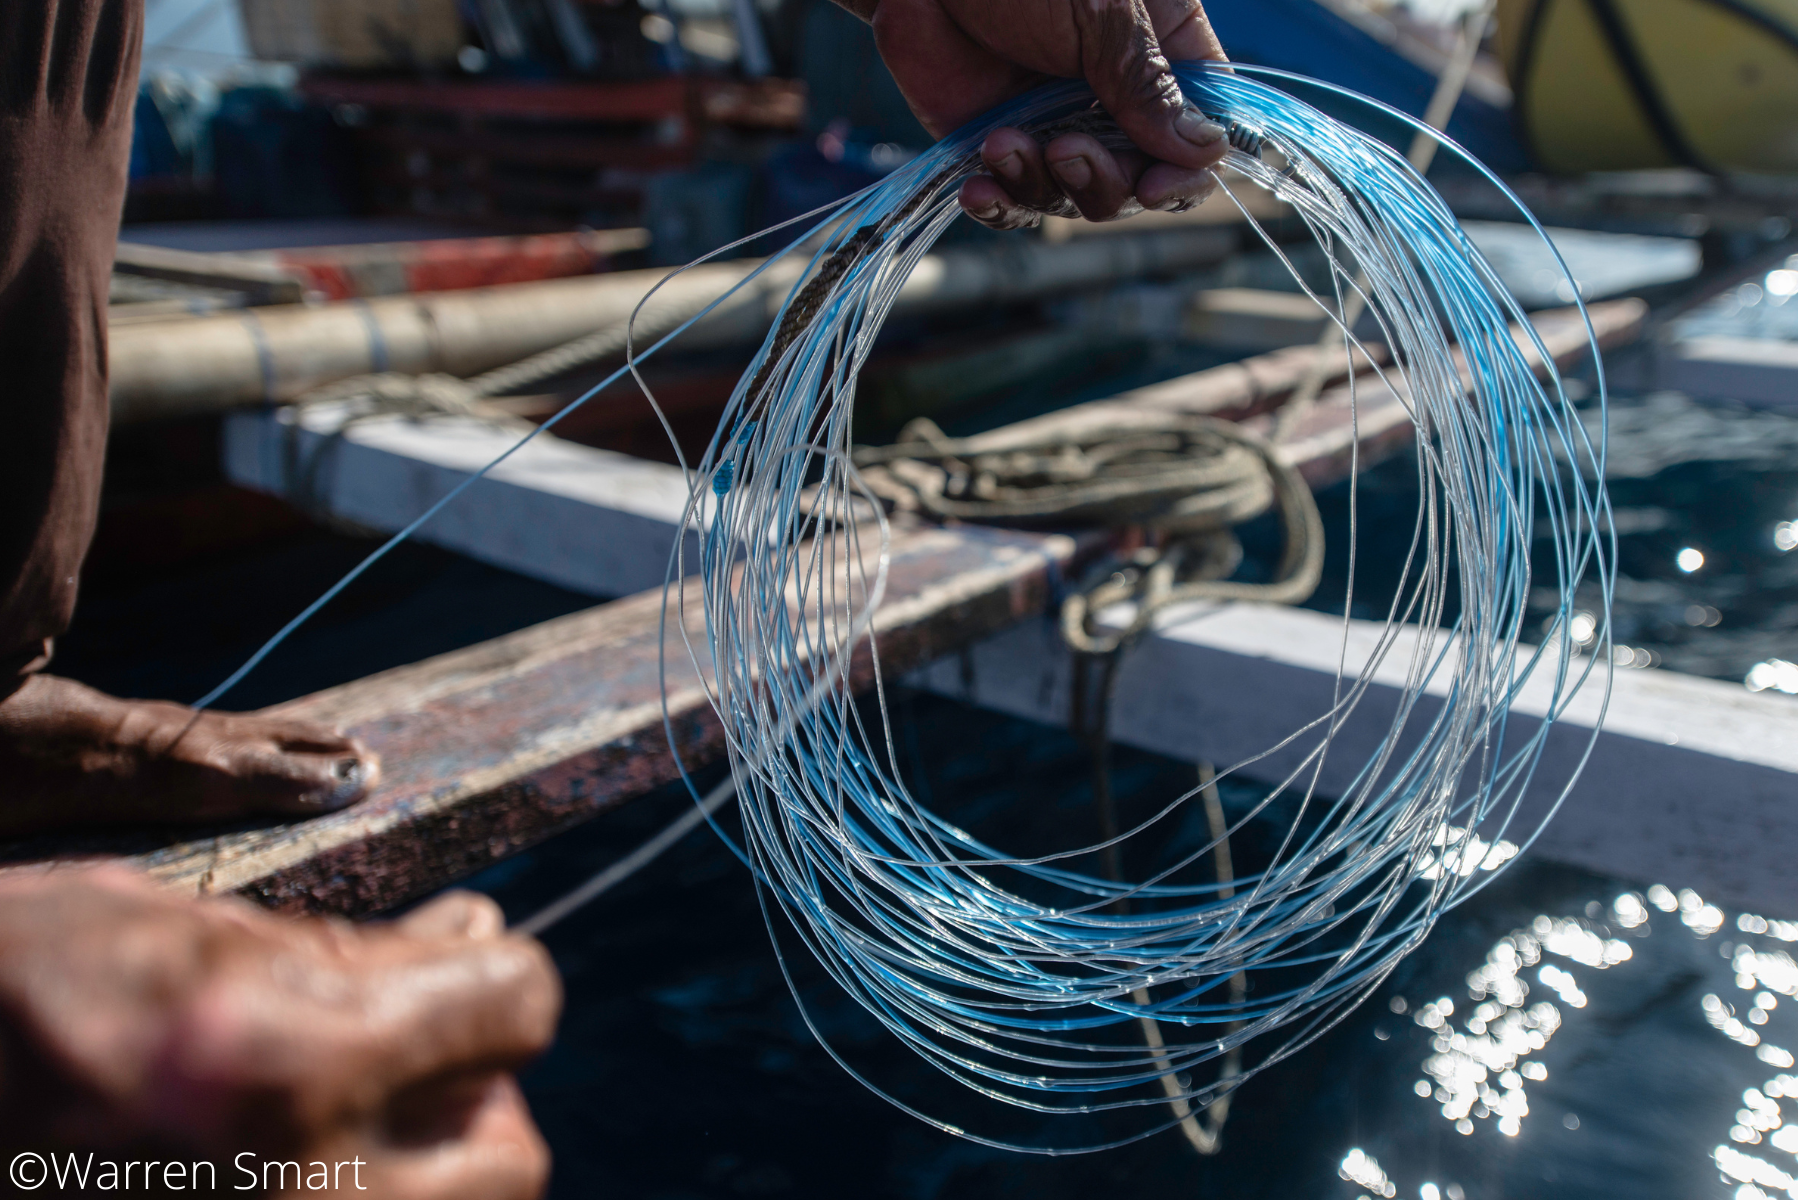 A picture of a monofilament line used in handline fishing.